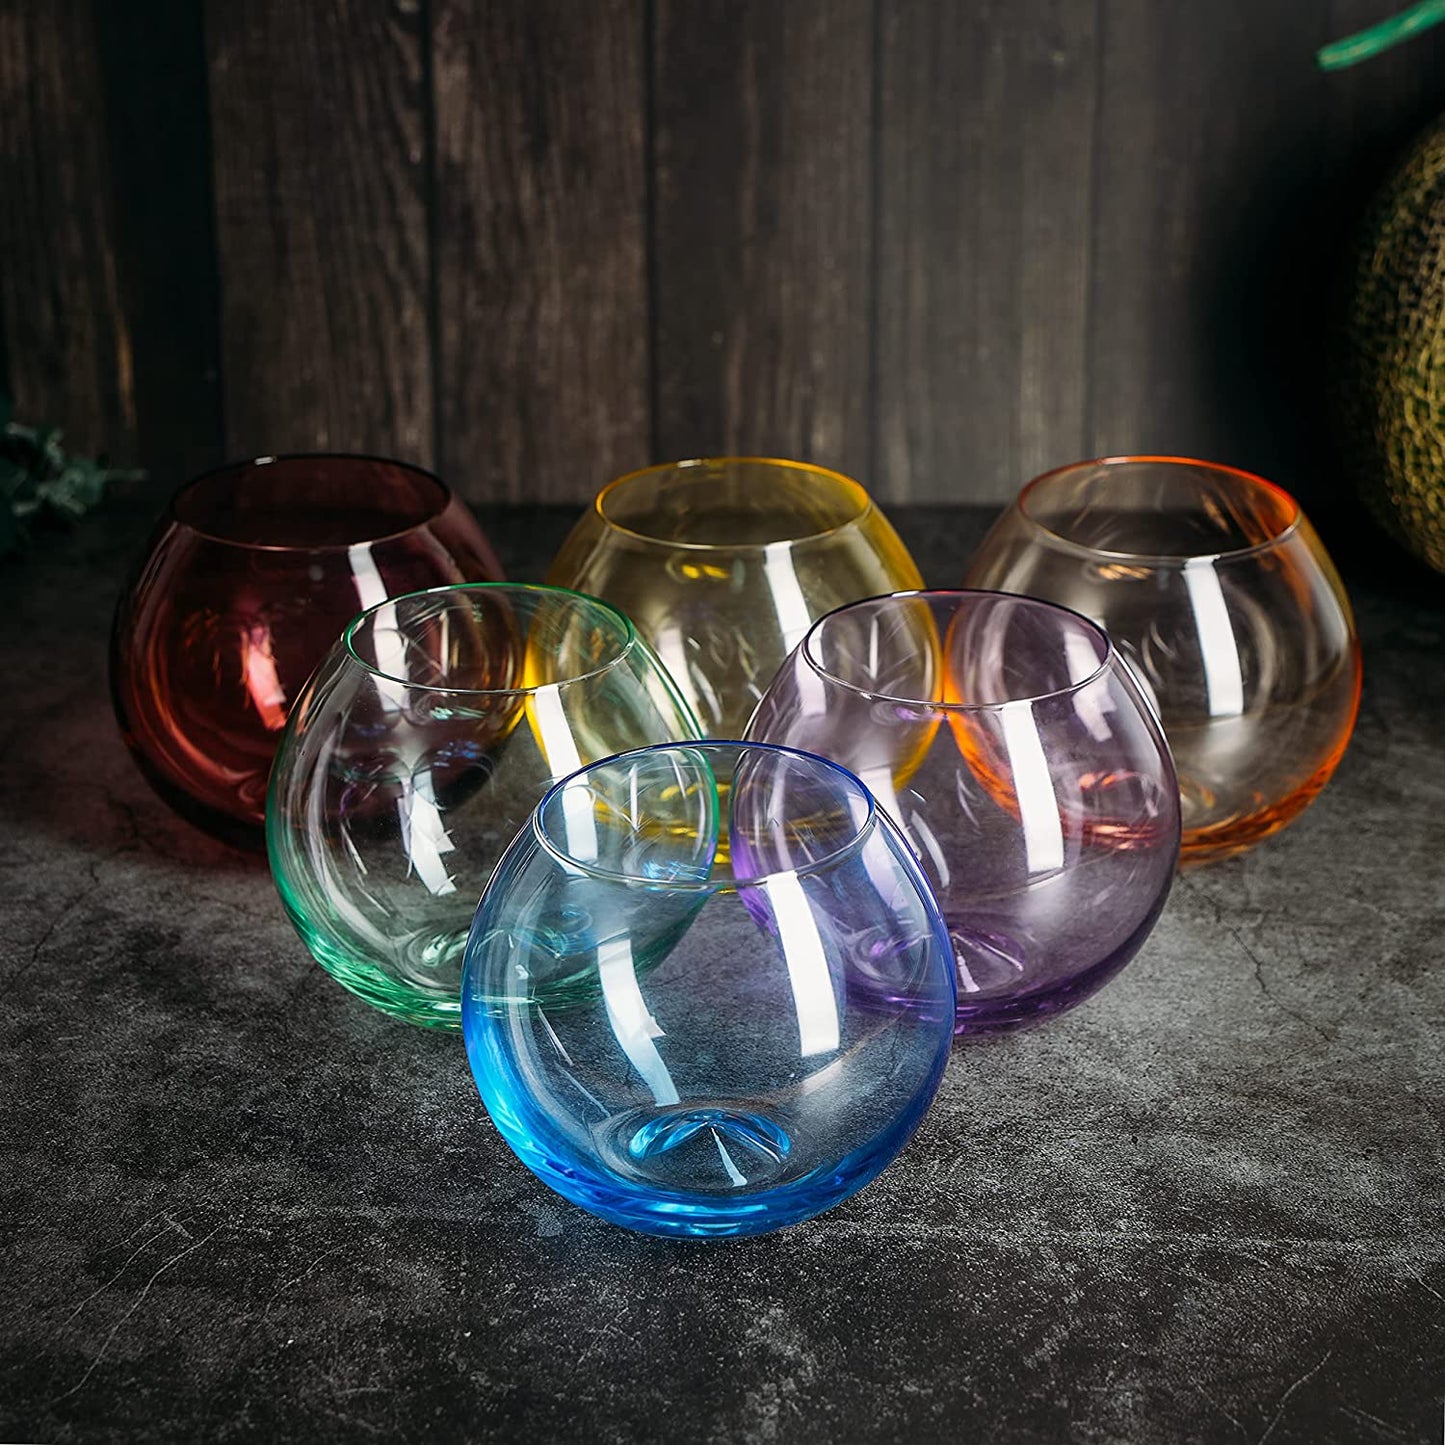 Rainbow Colored Stemless Wine Glasses (Set of 6)- by The Wine Savant